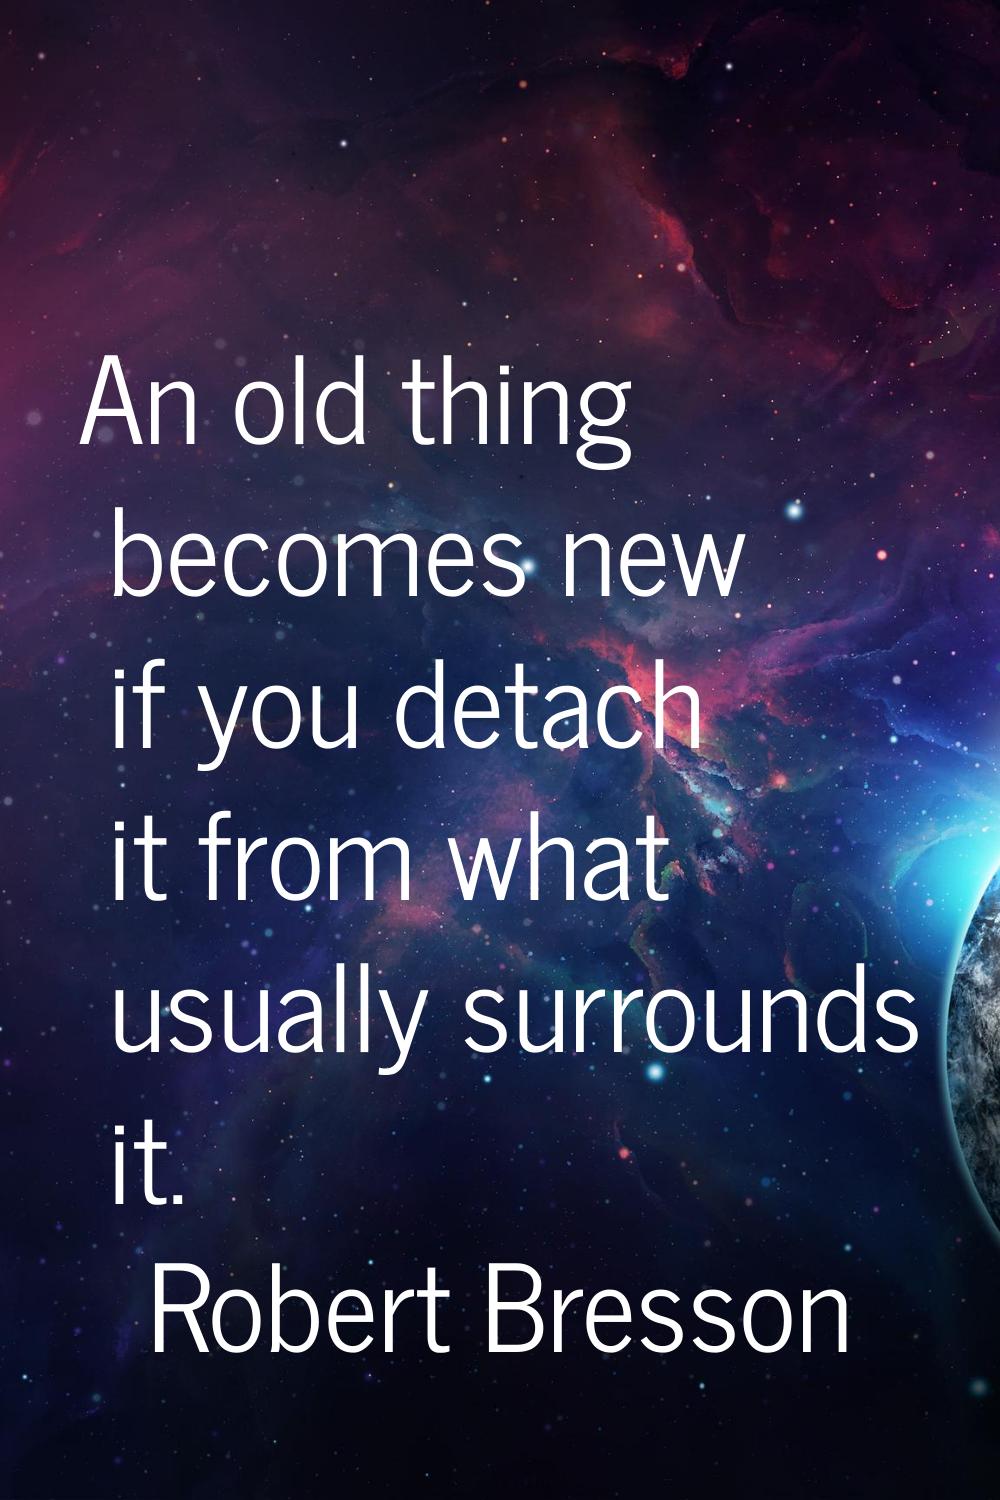 An old thing becomes new if you detach it from what usually surrounds it.